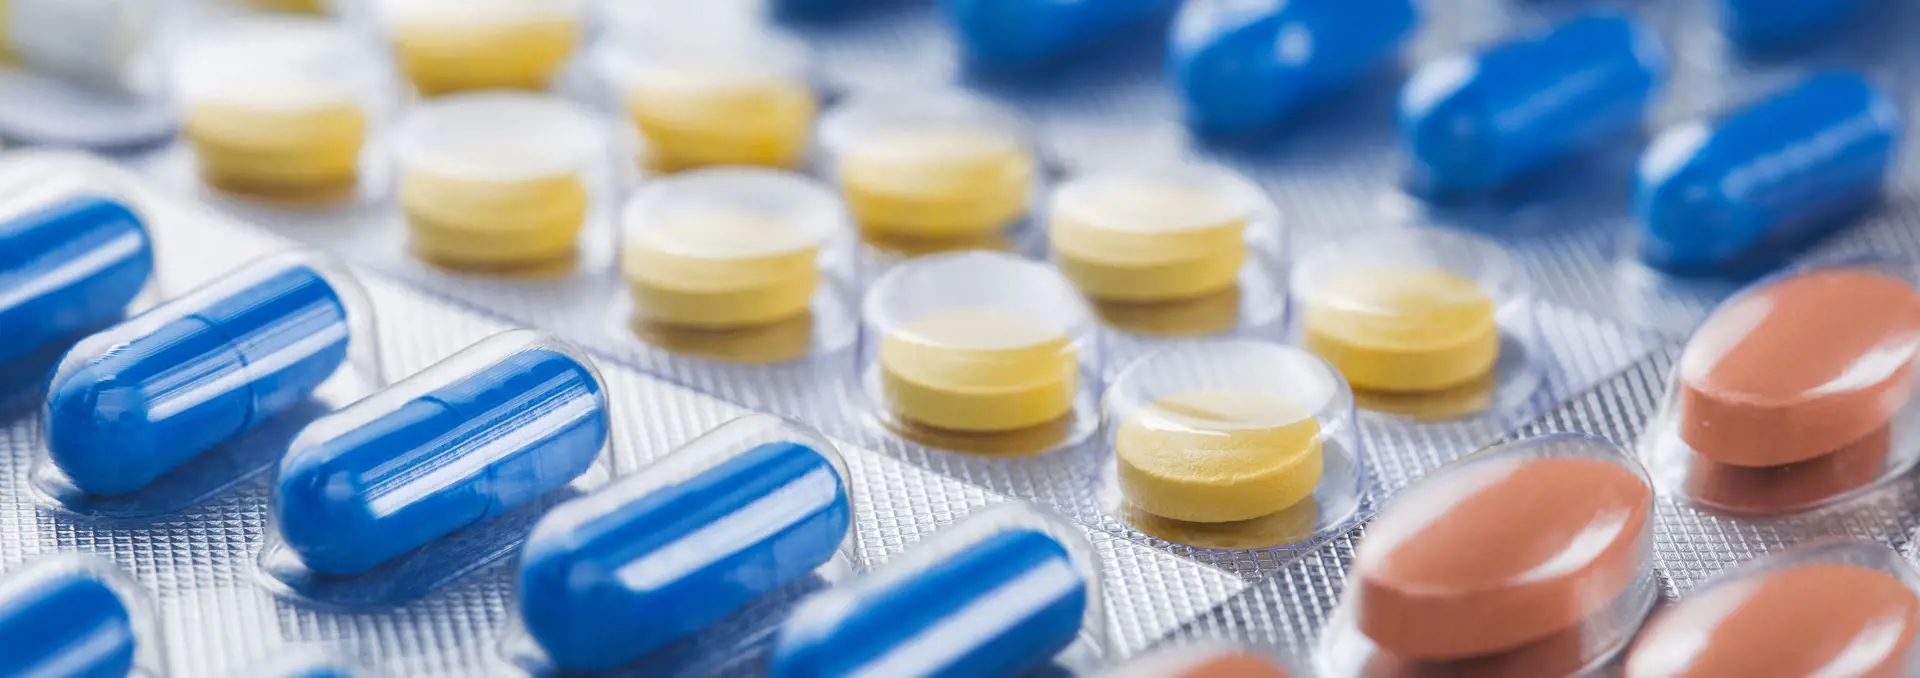 Medications in blister packaging: blue capsules, yellow tablets, brown tablets